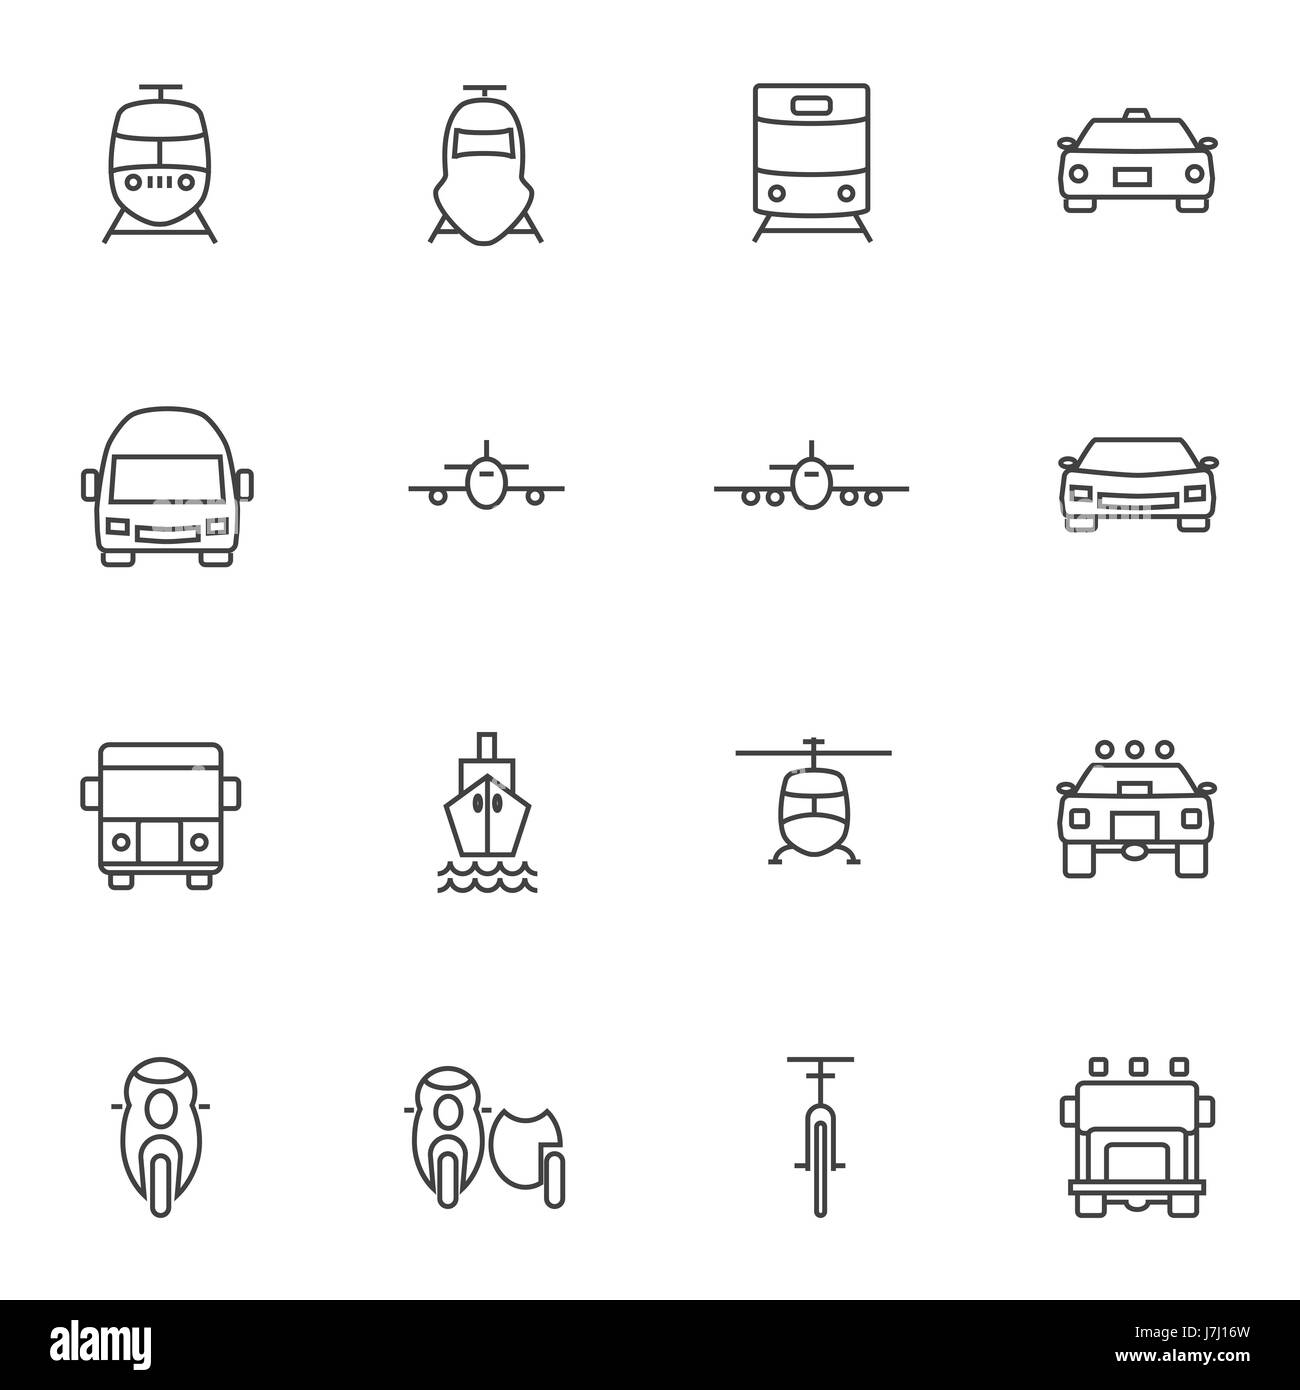 Vehicle icon sets. Line icons. Stock Vector